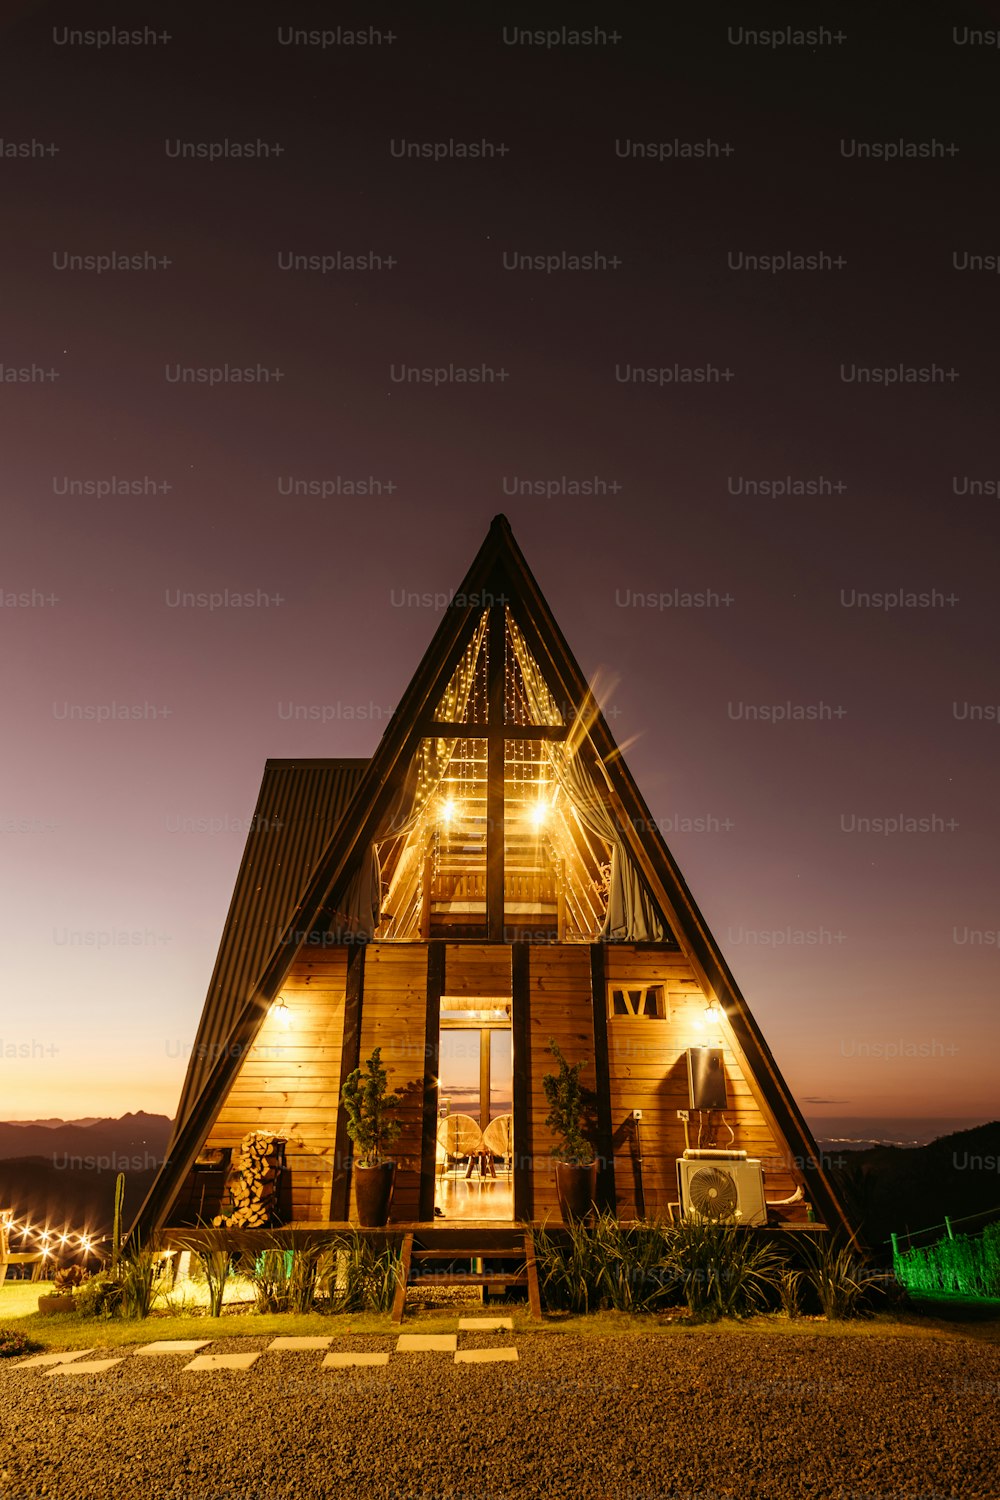 a wooden house lit up at night on a hill